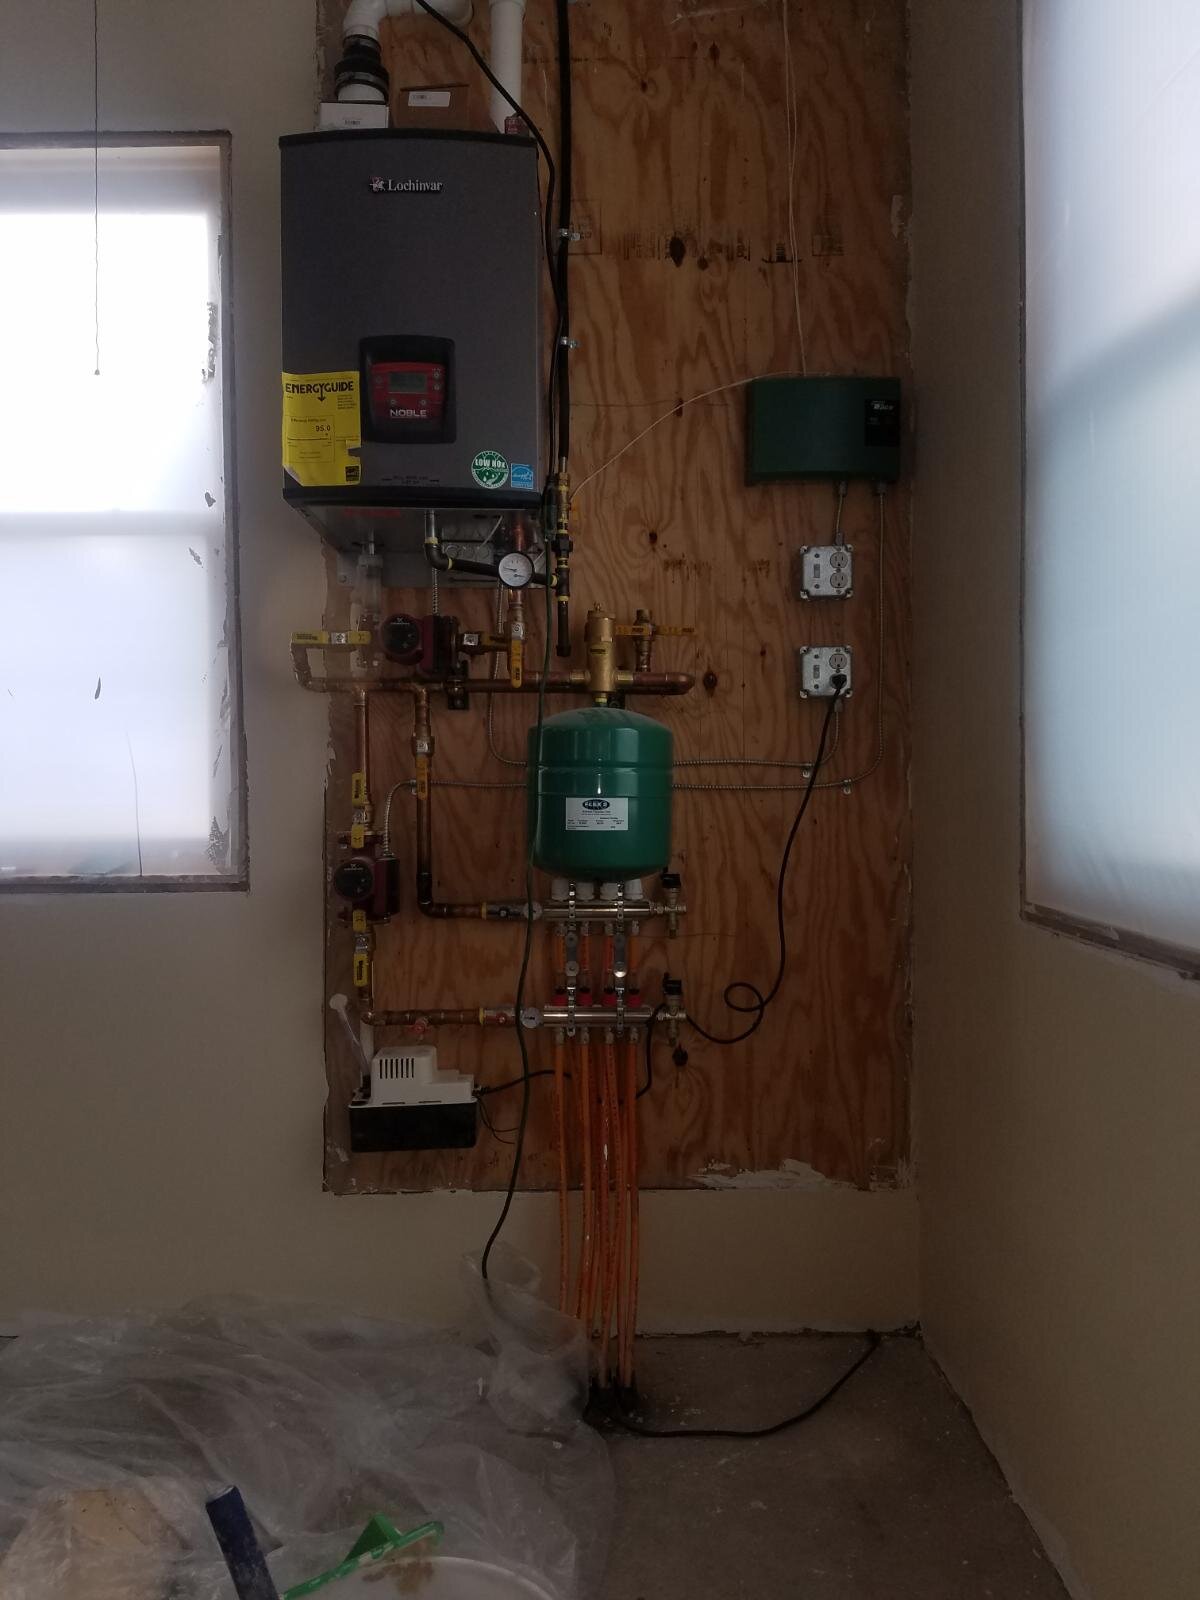  It doesn’t have to be complicated. This simple boiler system provides in-floor heat for a carpentry shop. 